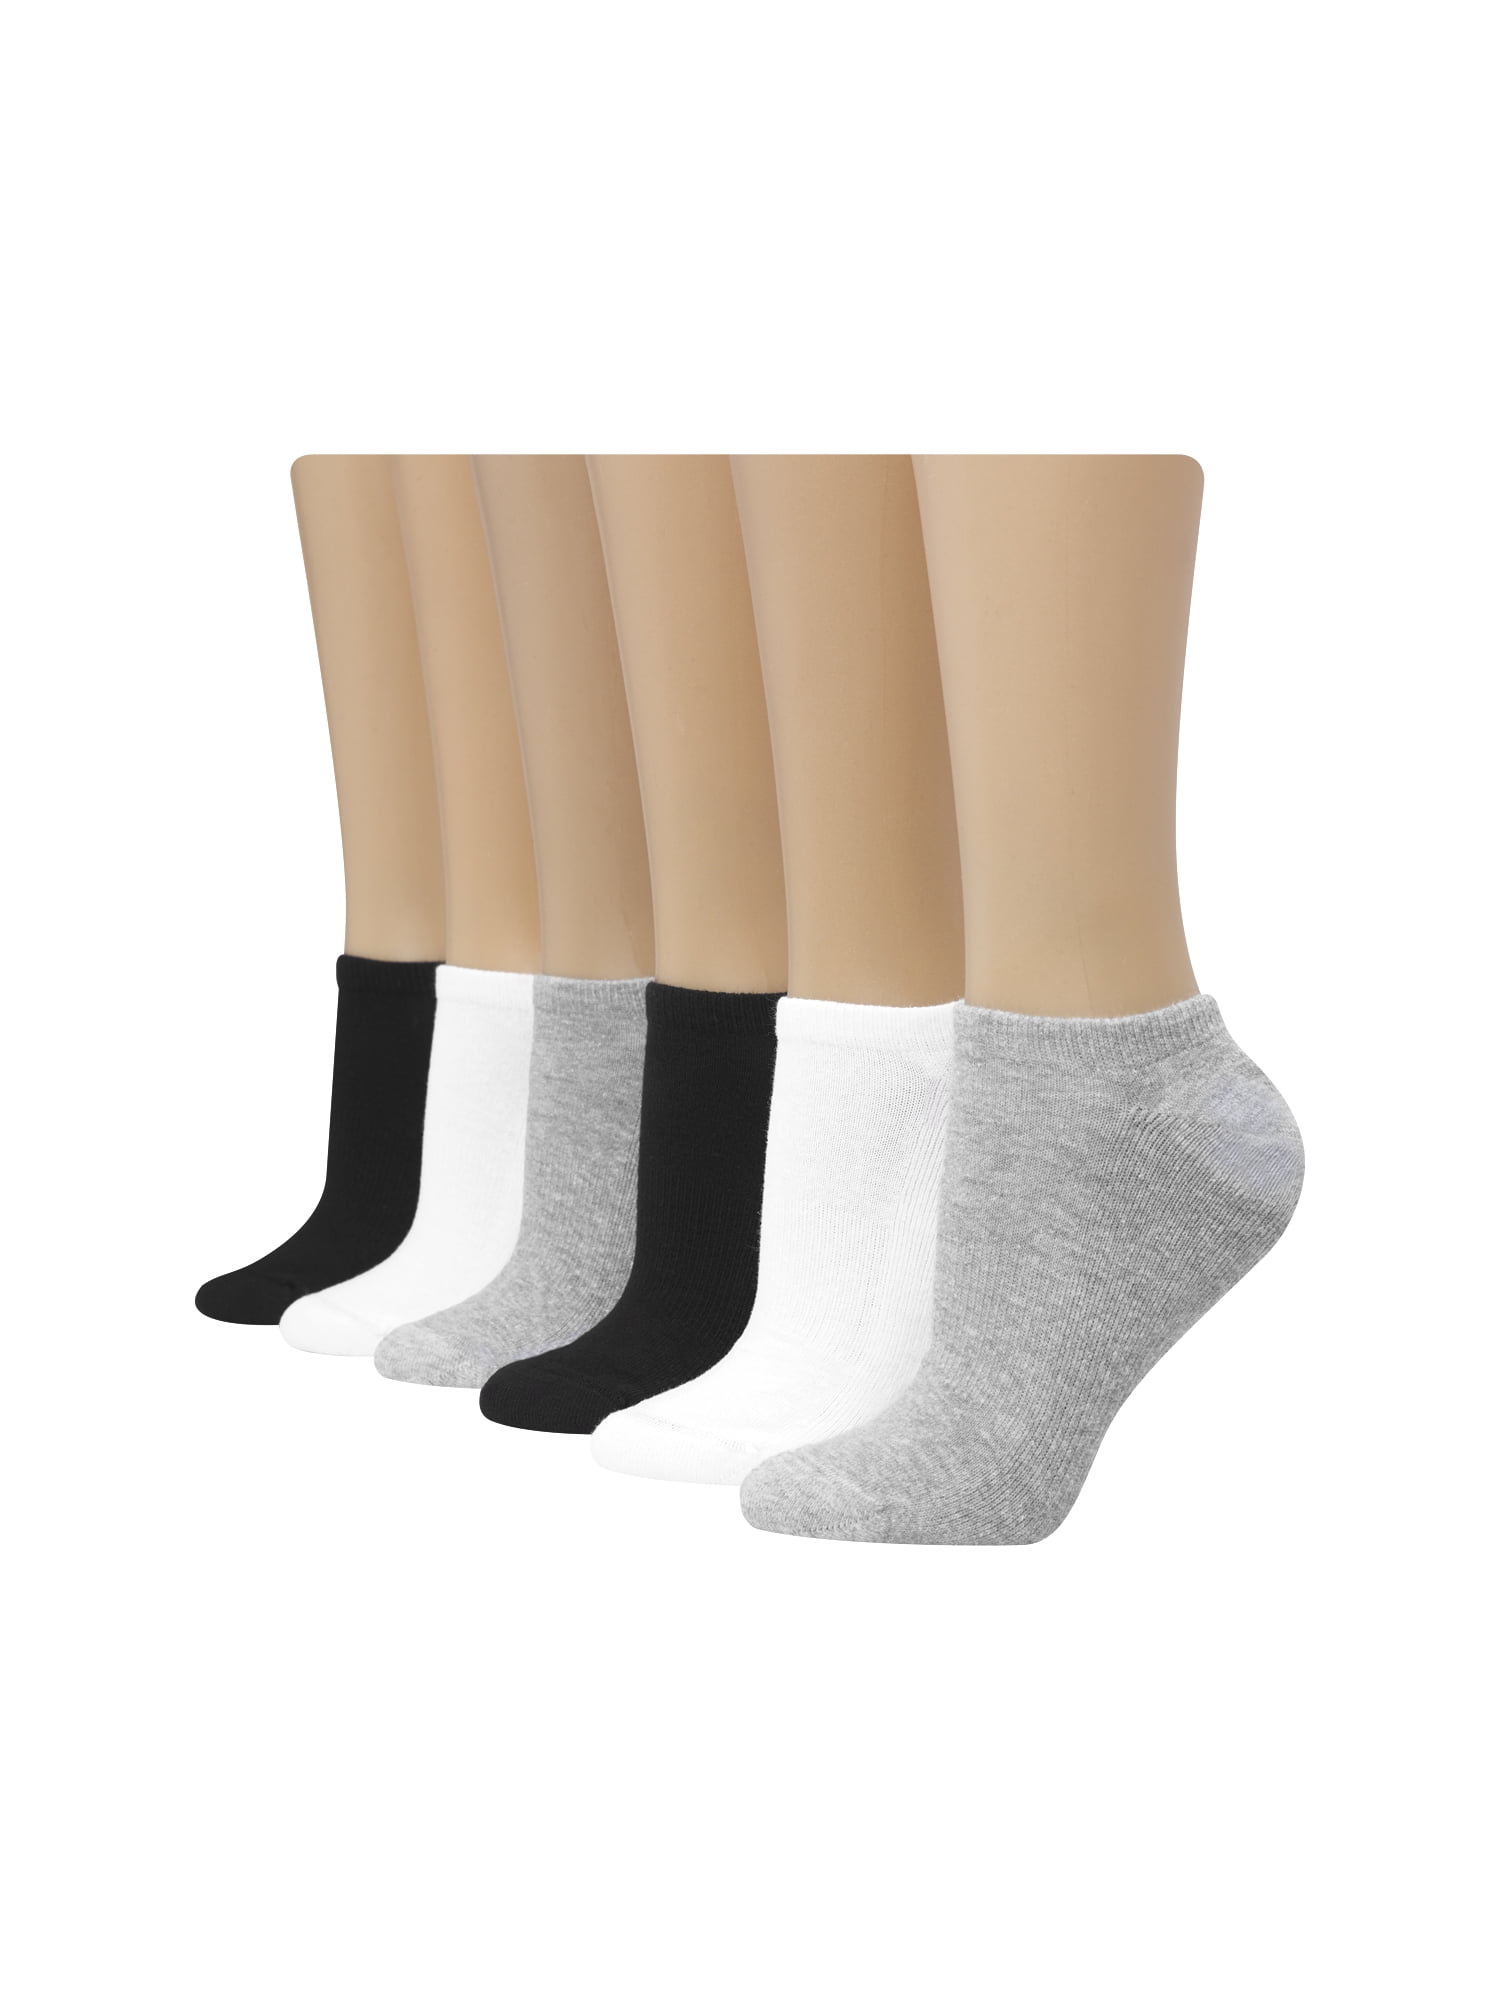 12 Pair HANES Lady White Cushioned Bottom Low cut Sport Sock Size 9-11.USA. 6 